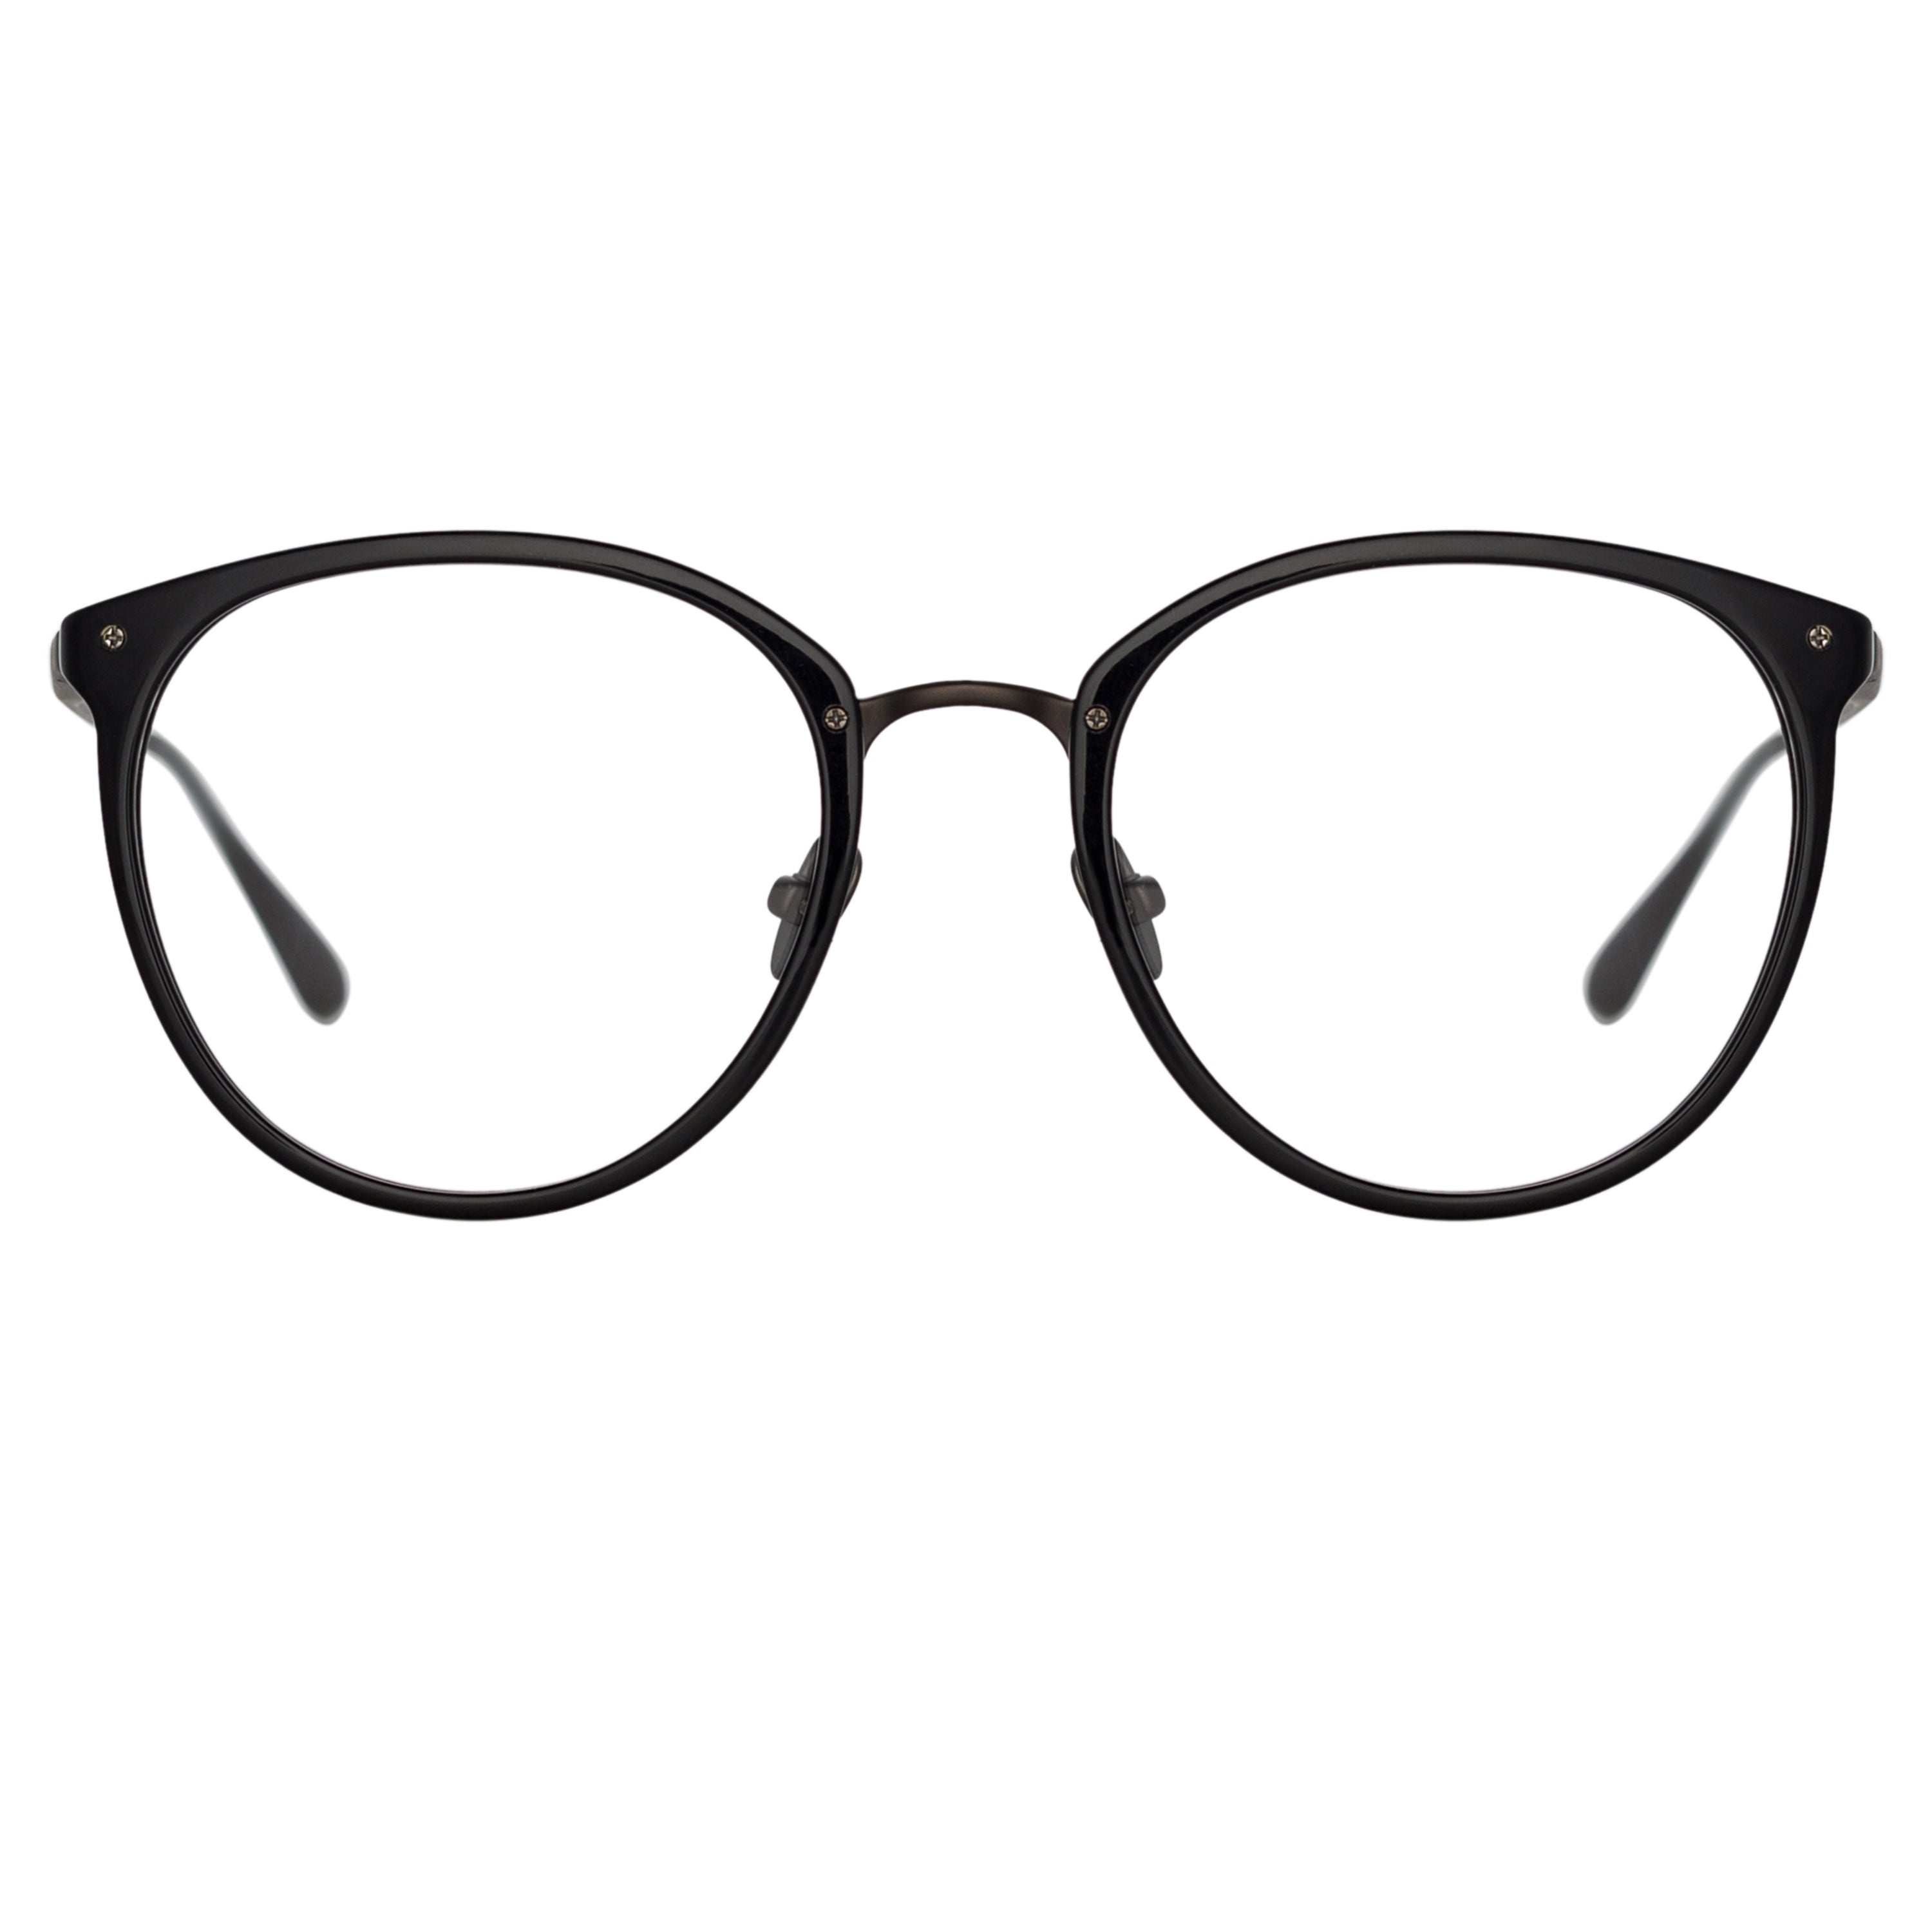 CALTHORPE OVAL OPTICAL FRAME IN BLACK AND NICKEL - 1